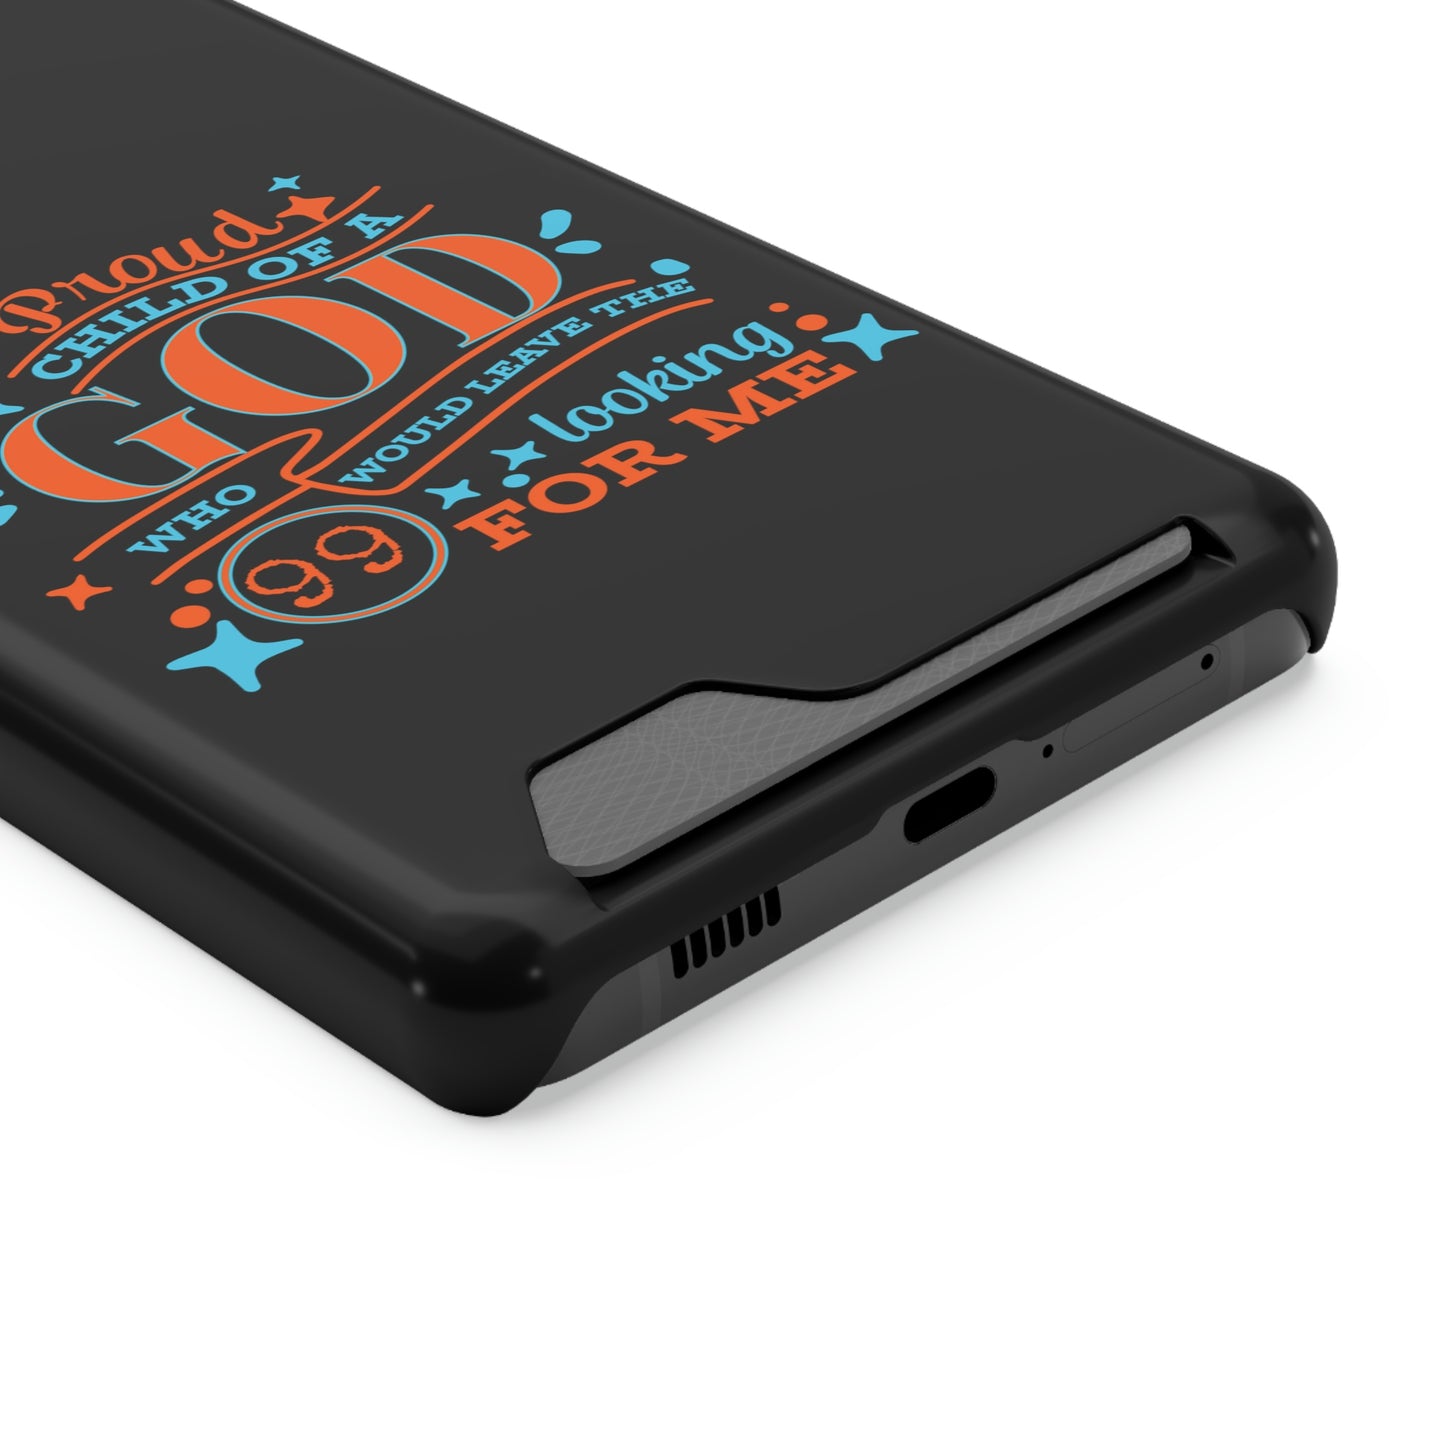 Proud Child Of A God Who Would Leave The 99 Looking for Me Phone Case With Card Holder